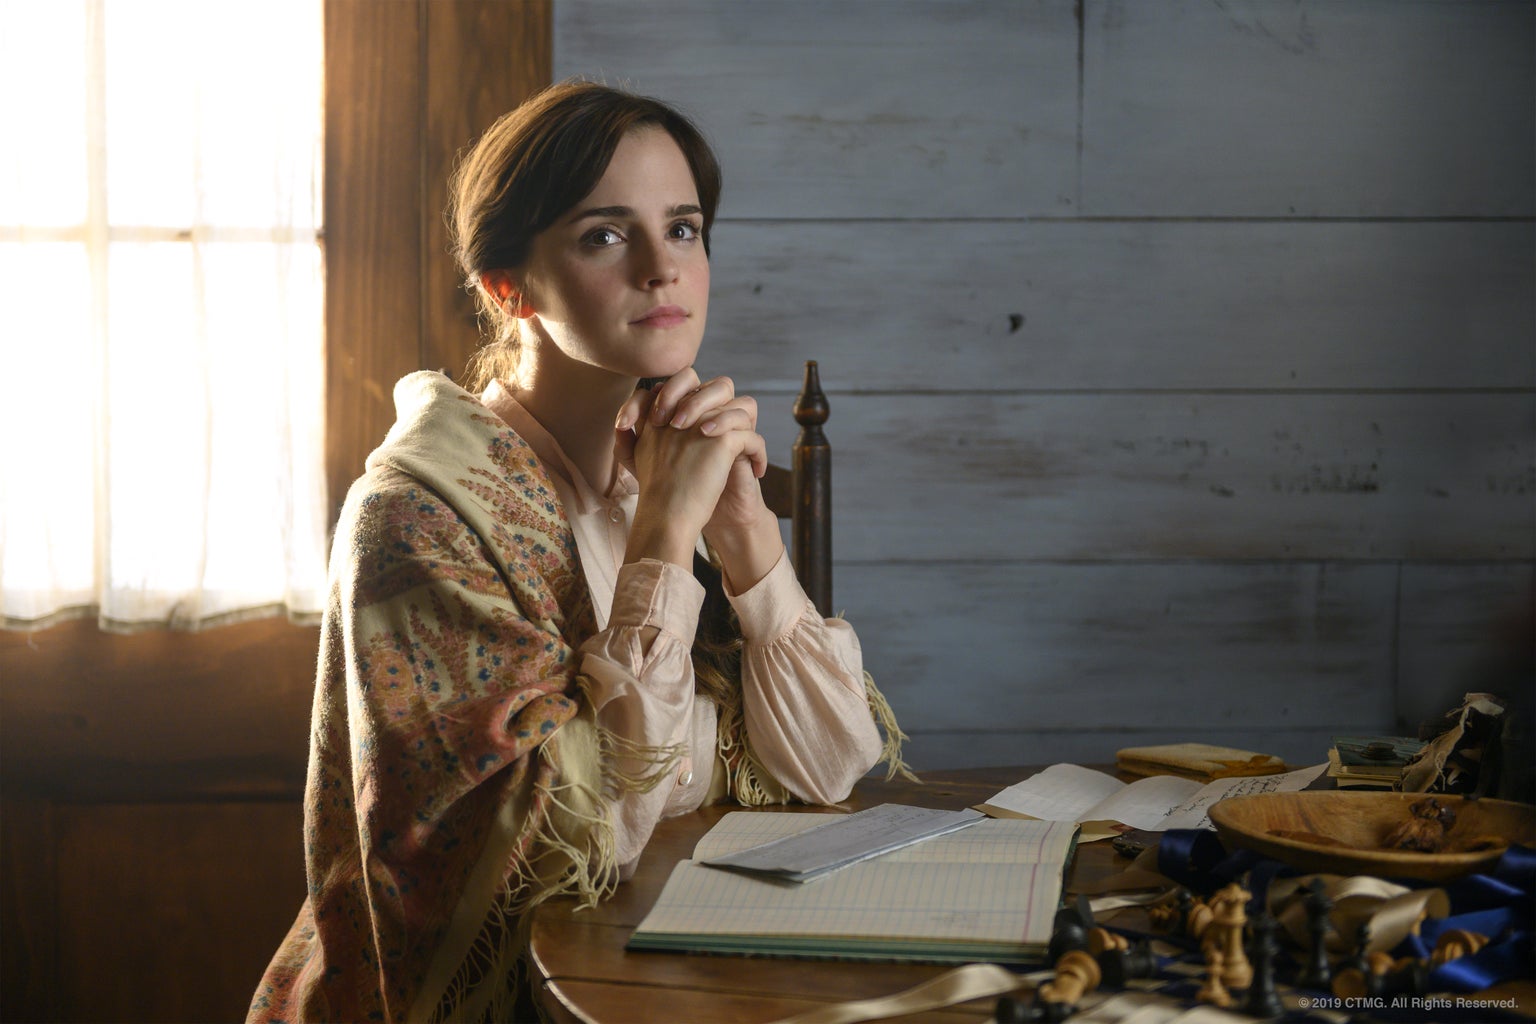 Image of Meg March from the film, Little Women